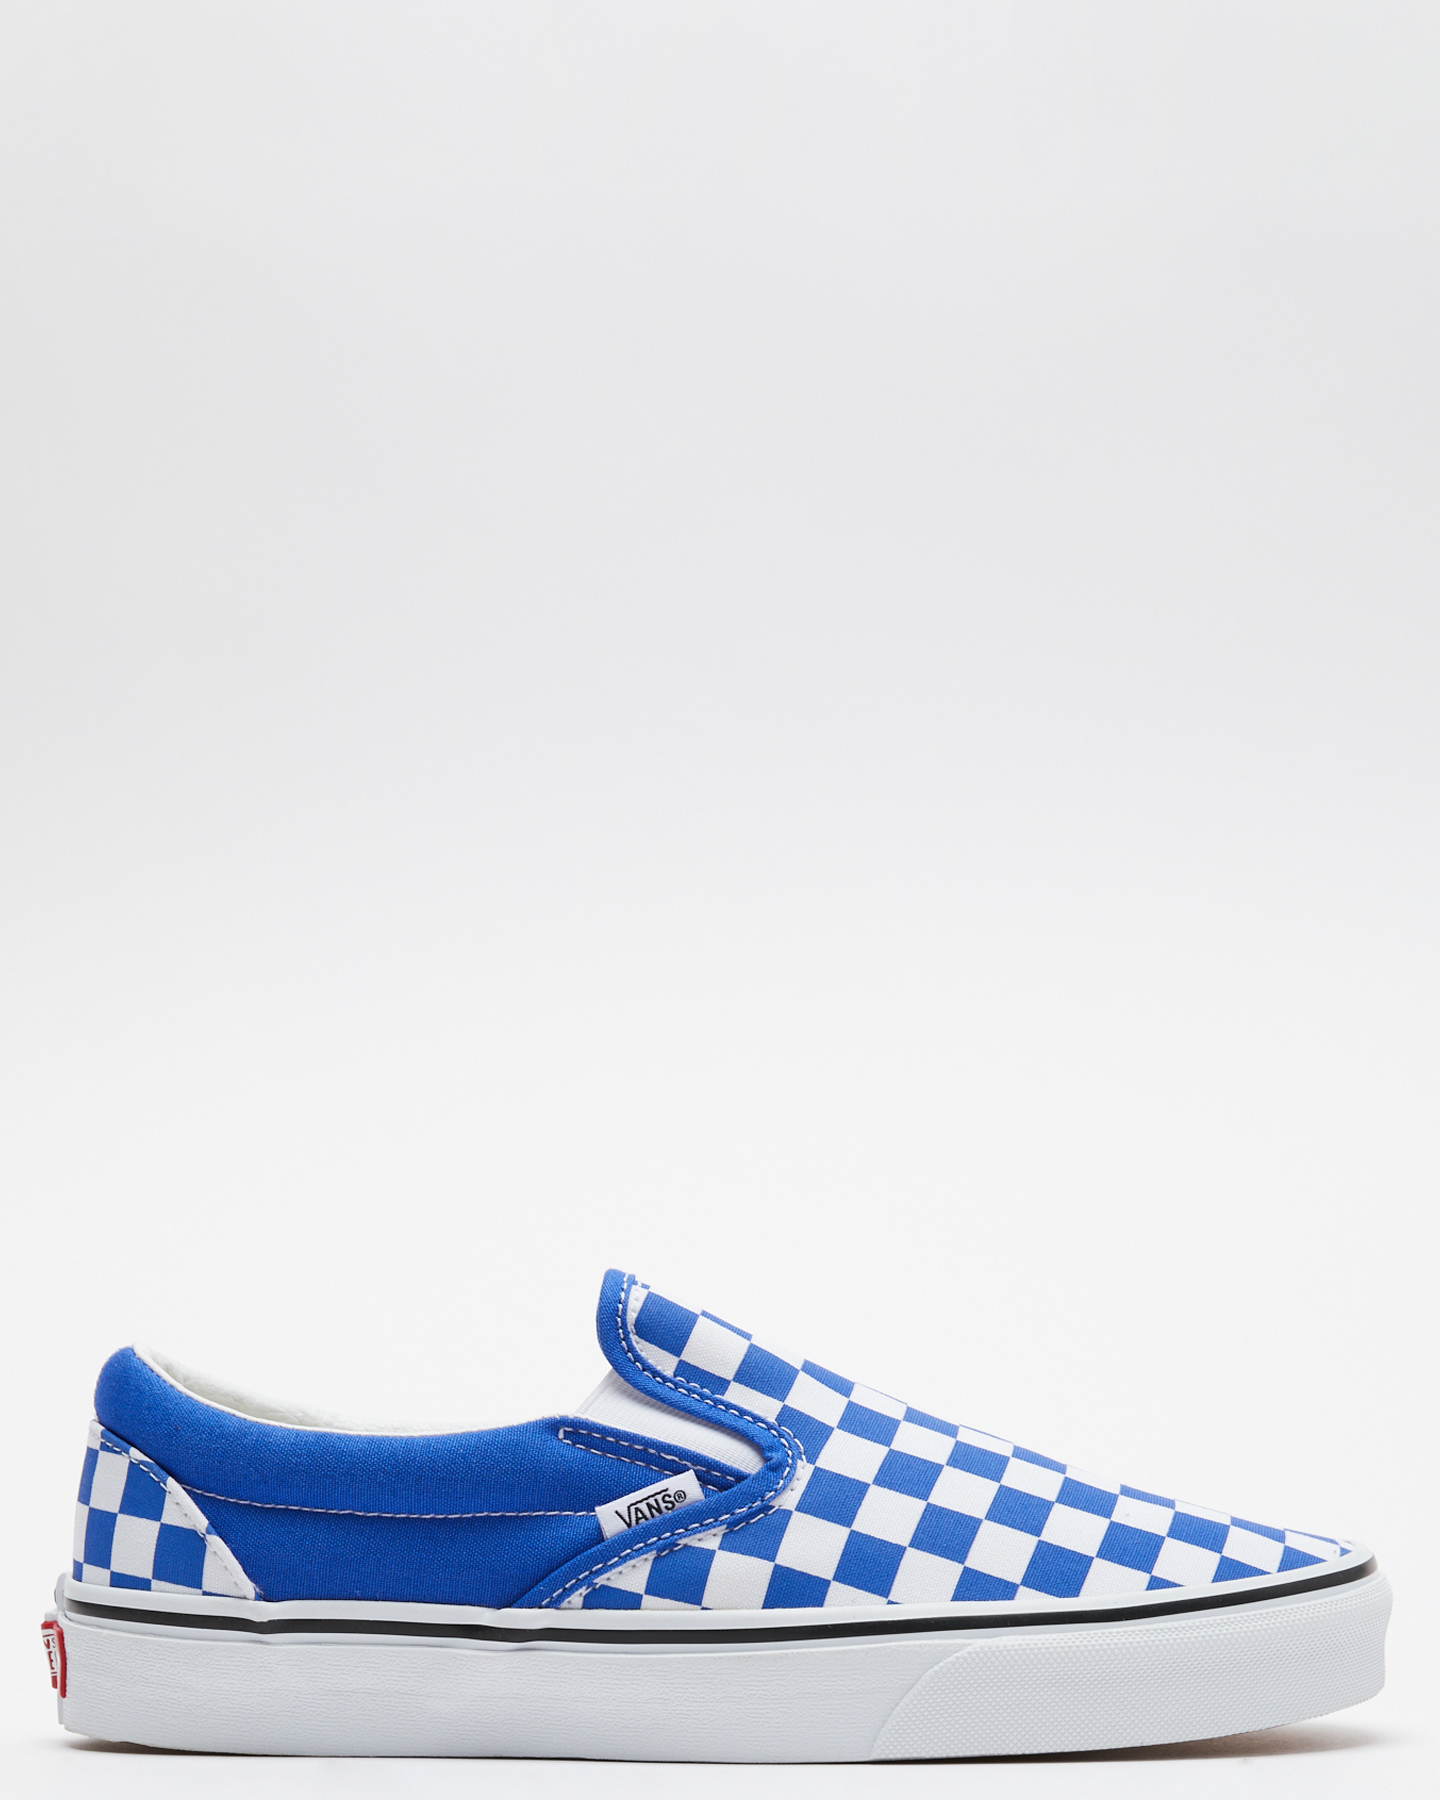 Moedig Egomania Spit Vans Classic Slip-On Color Theory Checkerboard Dazzling Blue - Blue |  SurfStitch